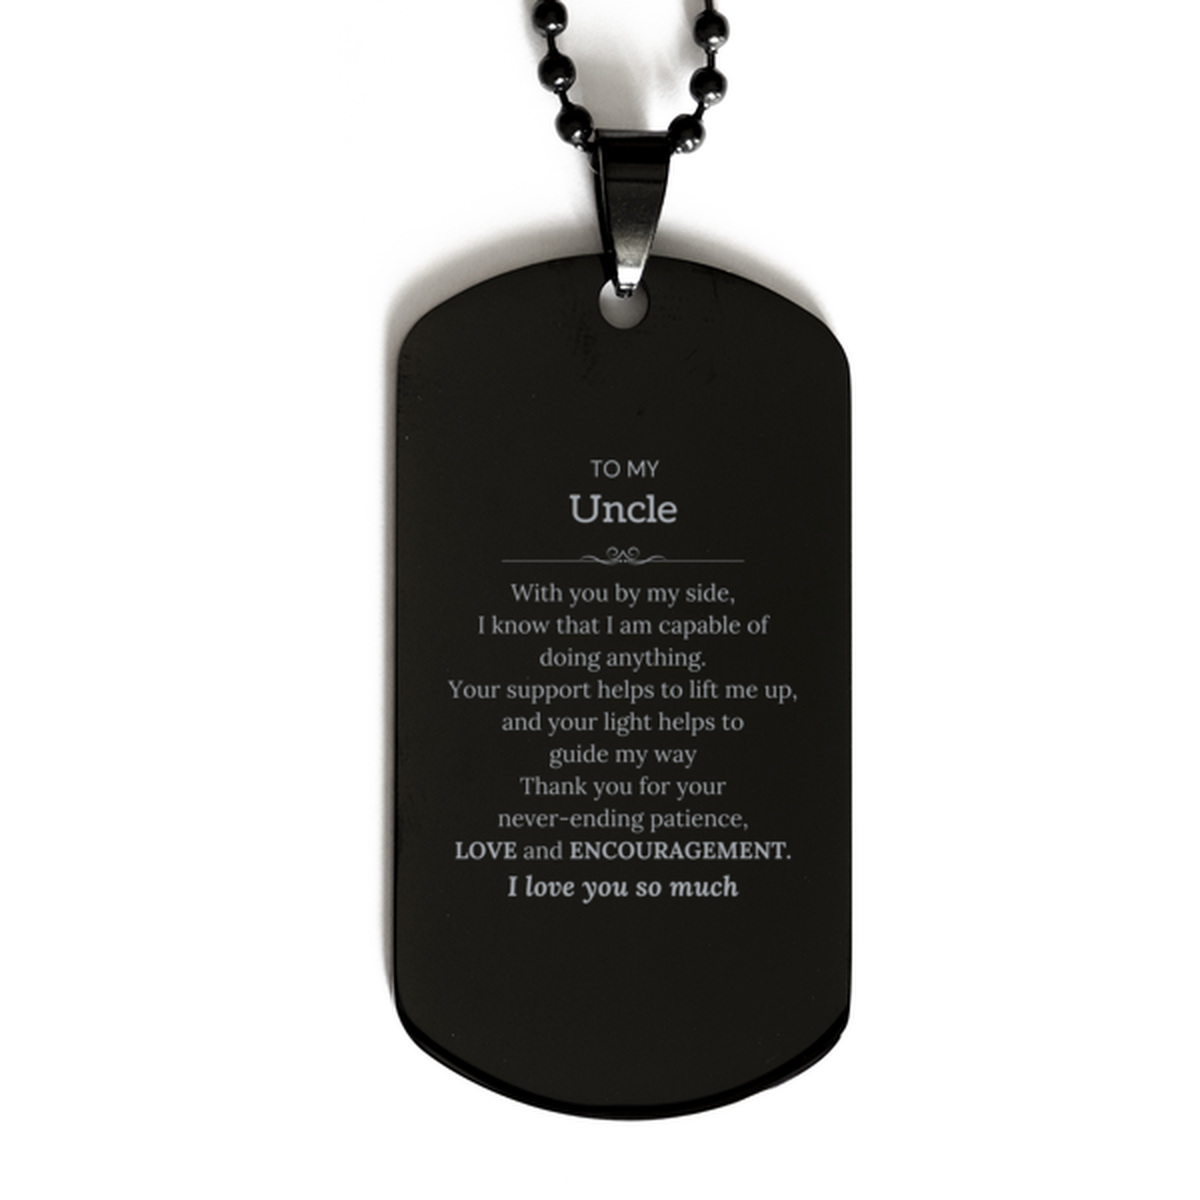 Appreciation Uncle Black Dog Tag Gifts, To My Uncle Birthday Christmas Wedding Keepsake Gifts for Uncle With you by my side, I know that I am capable of doing anything. I love you so much